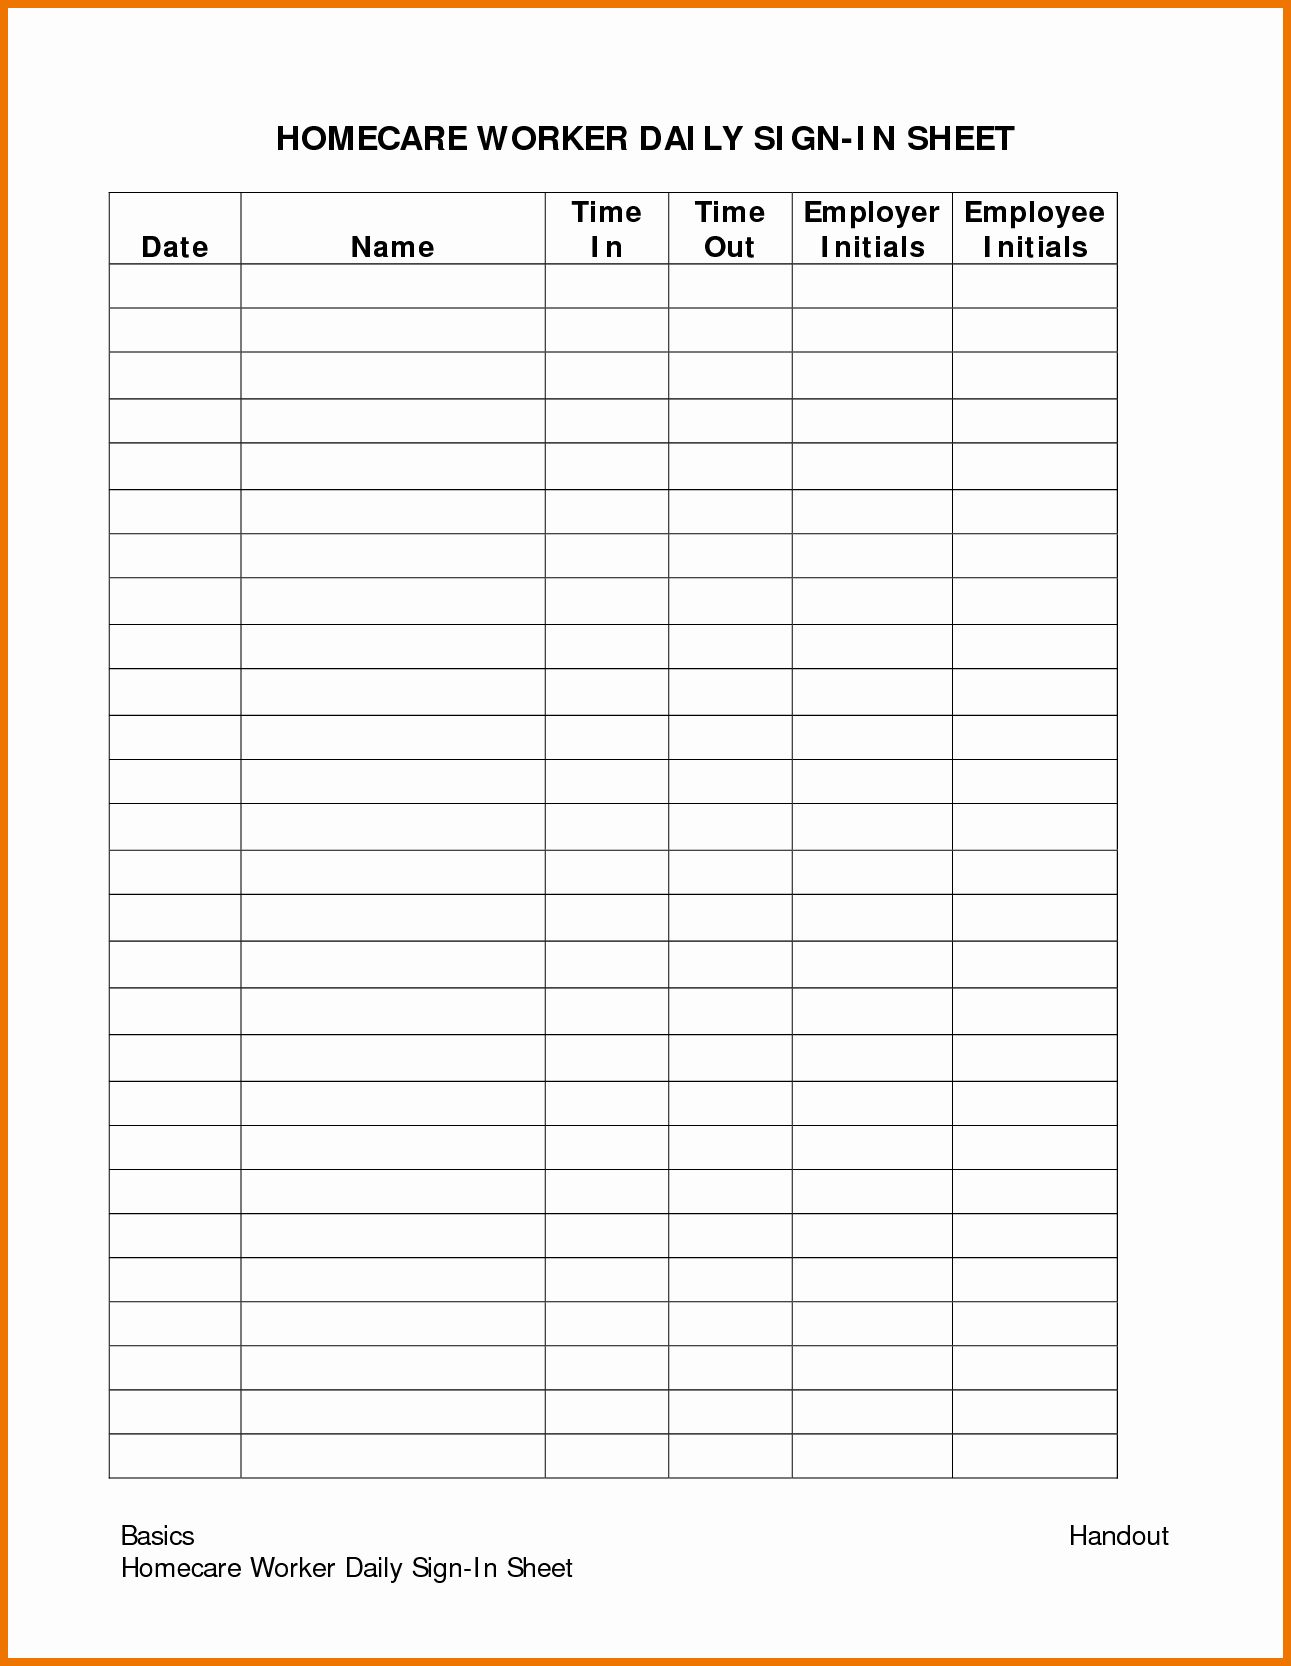 Staff Sign In Sheet Template Unique Brilliant Daily attendance Sign In Sheet for Homecare